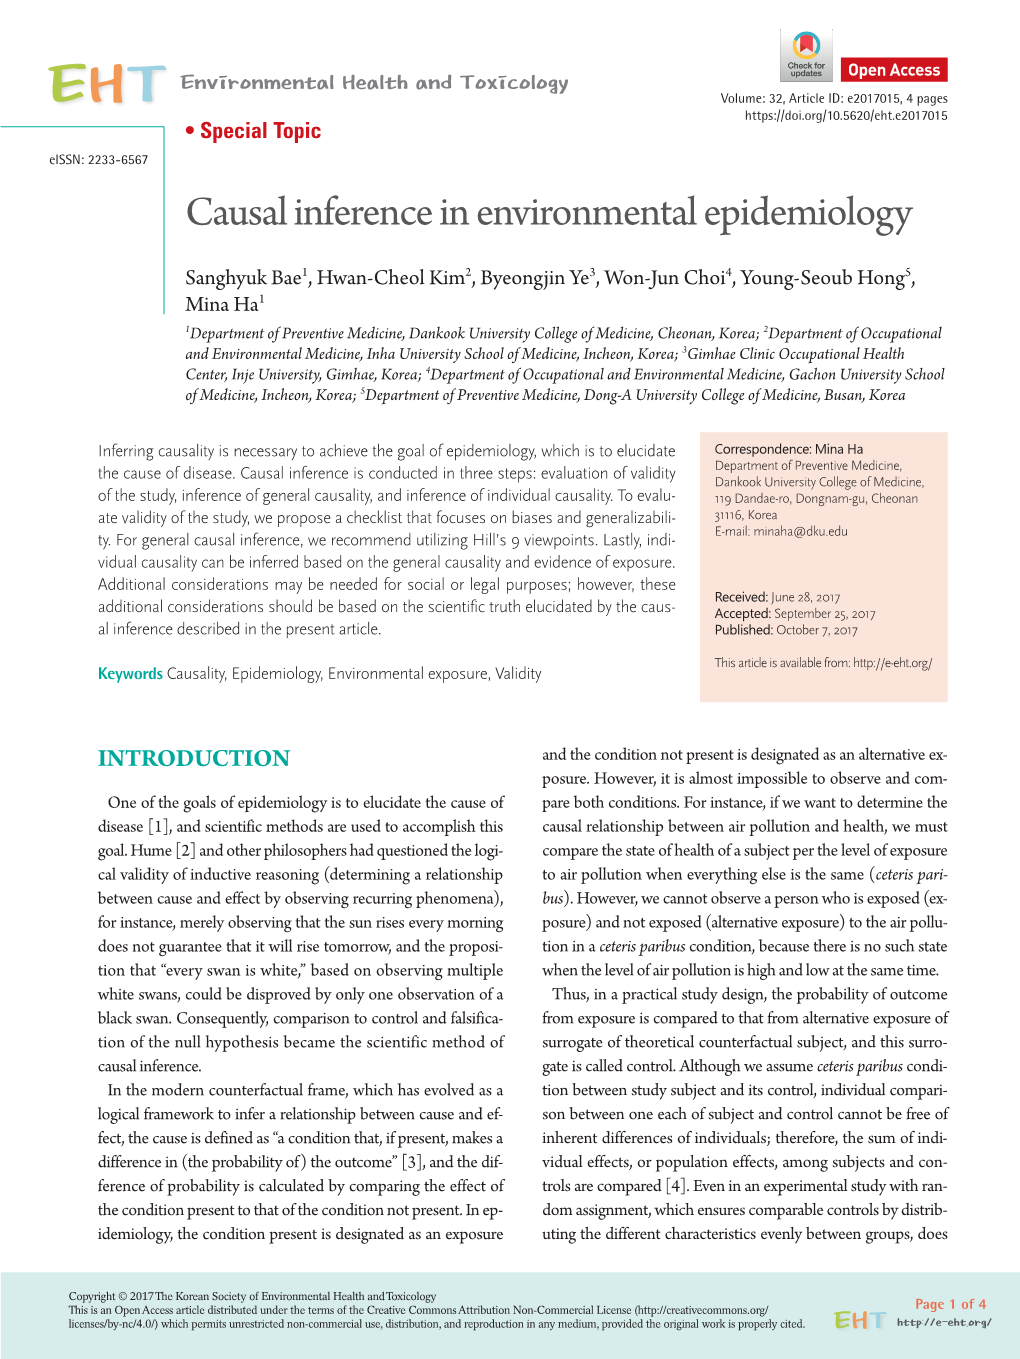 Causal Inference in Environmental Epidemiology